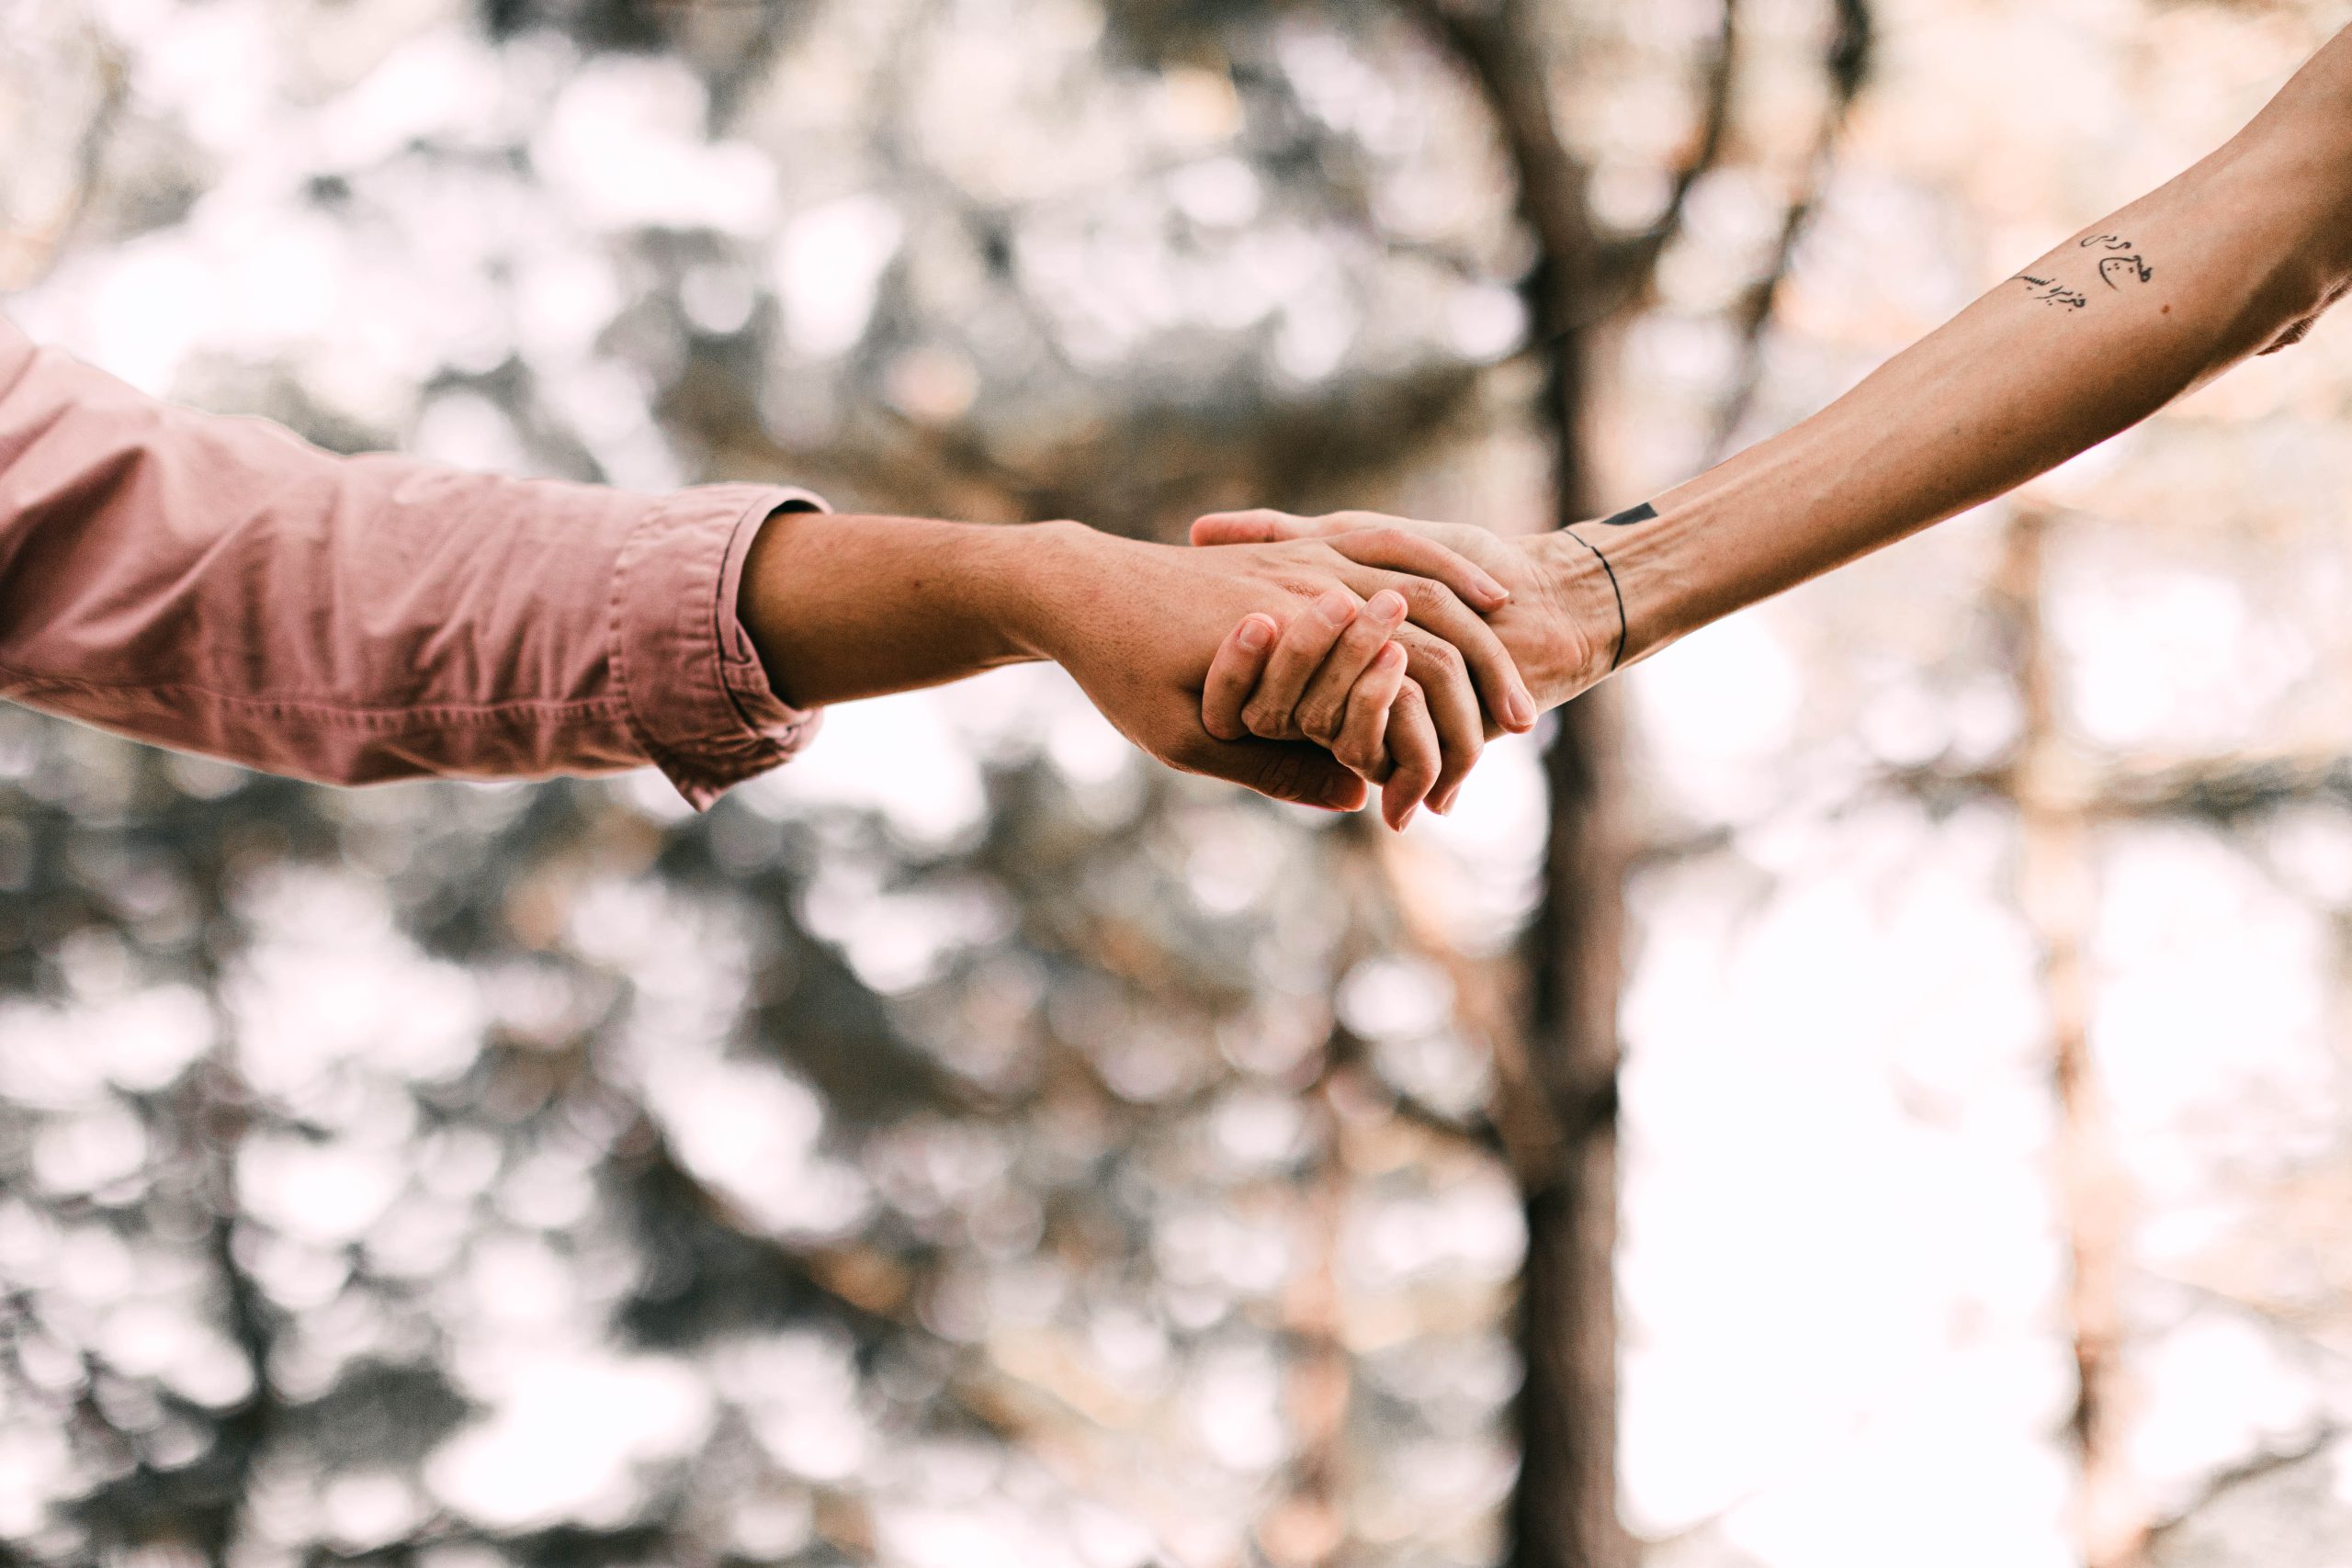 Two people holding hands | Photo by tabitha turner on Unsplash